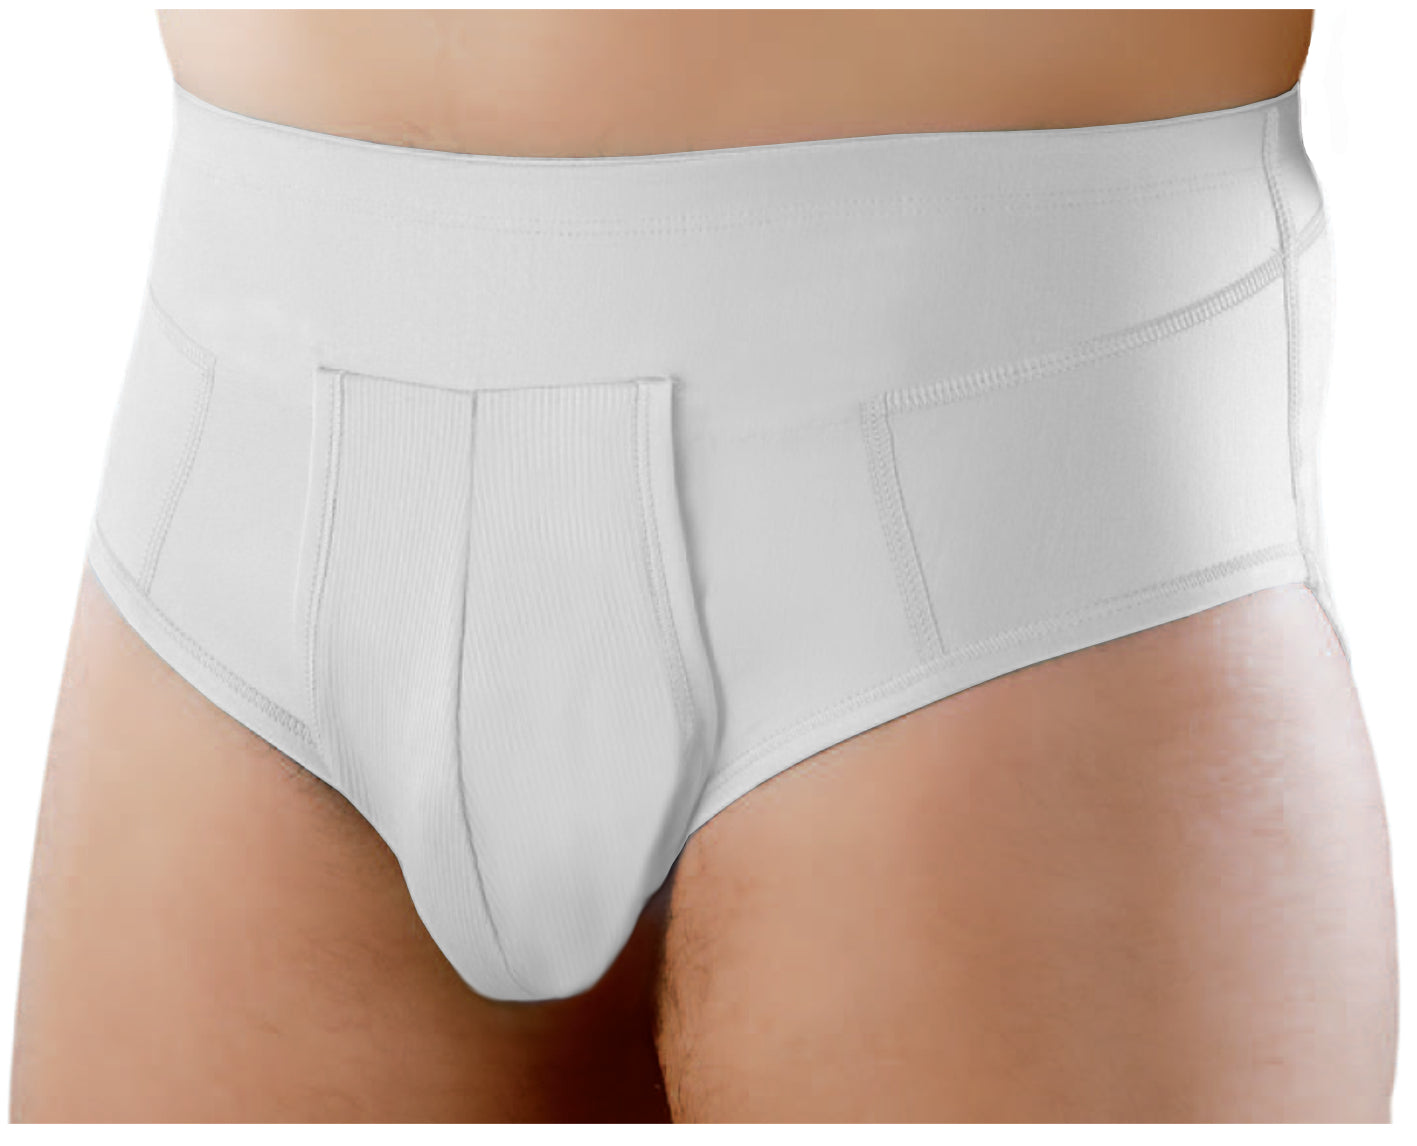 Hernia Brace Free Shipping On Orders 75 And Up Underworks